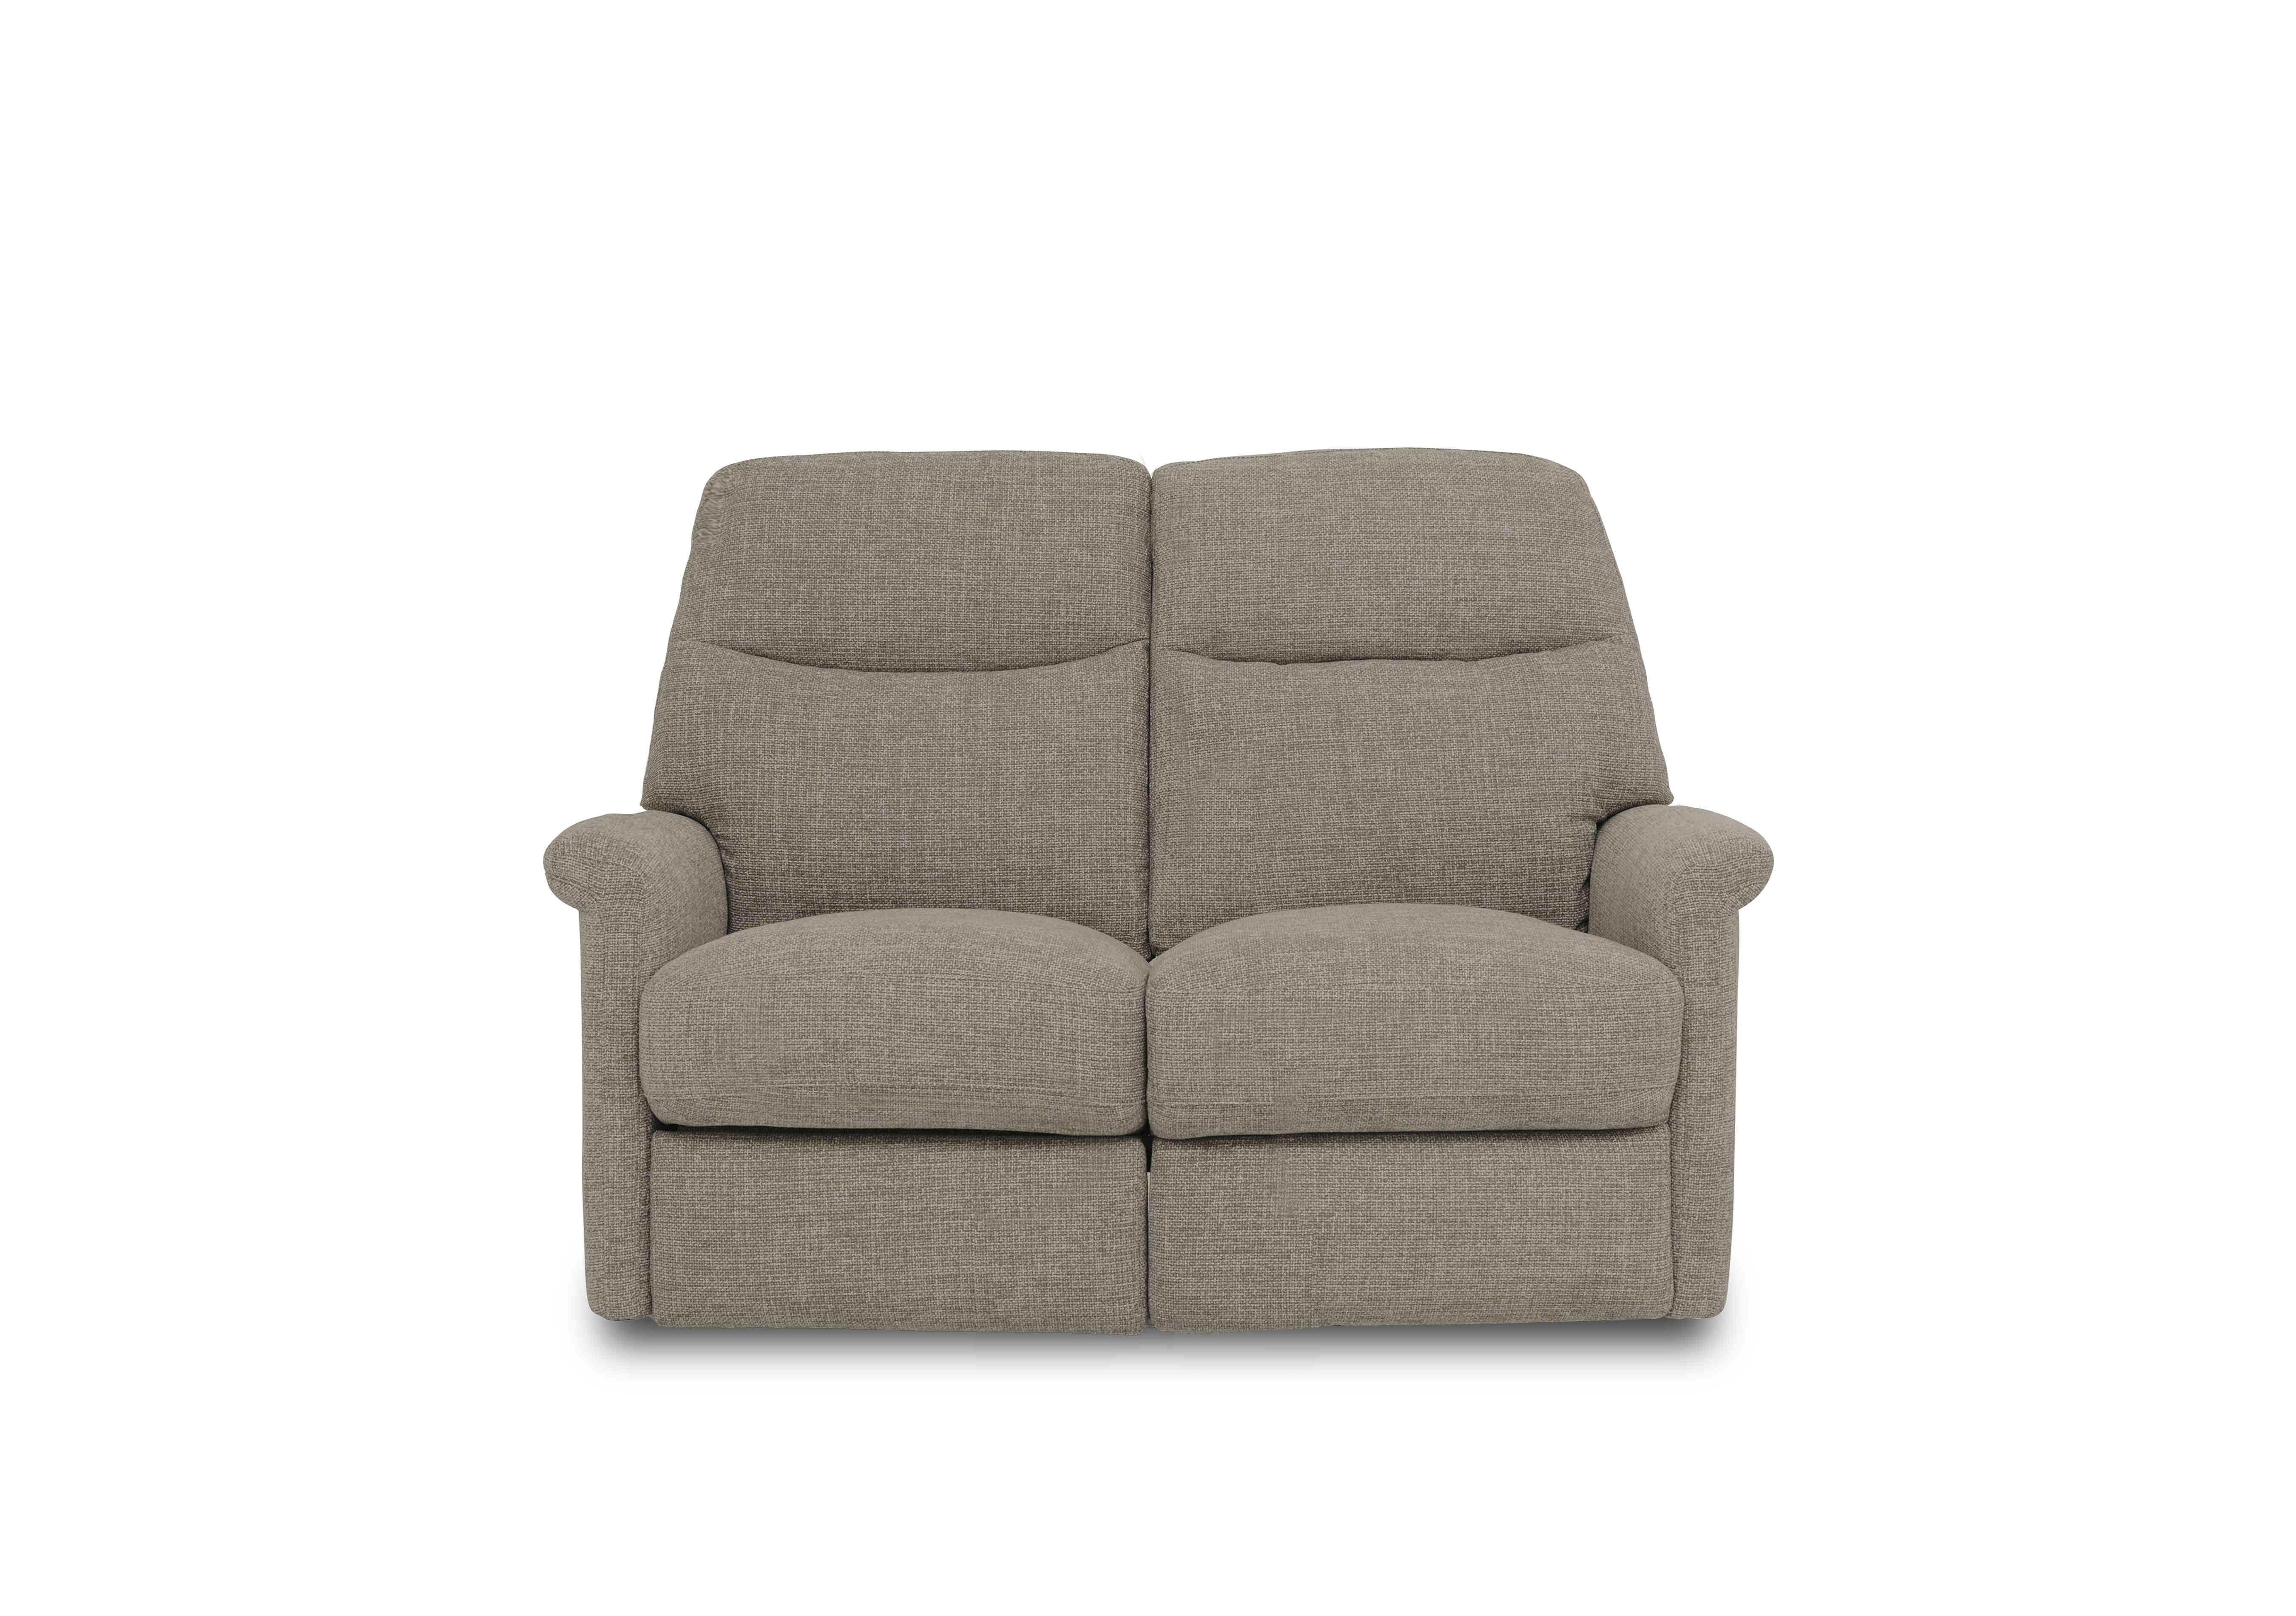 Compact Collection Lille 2 Seater Fabric Sofa in Fab-Cac-R120 Sand on Furniture Village